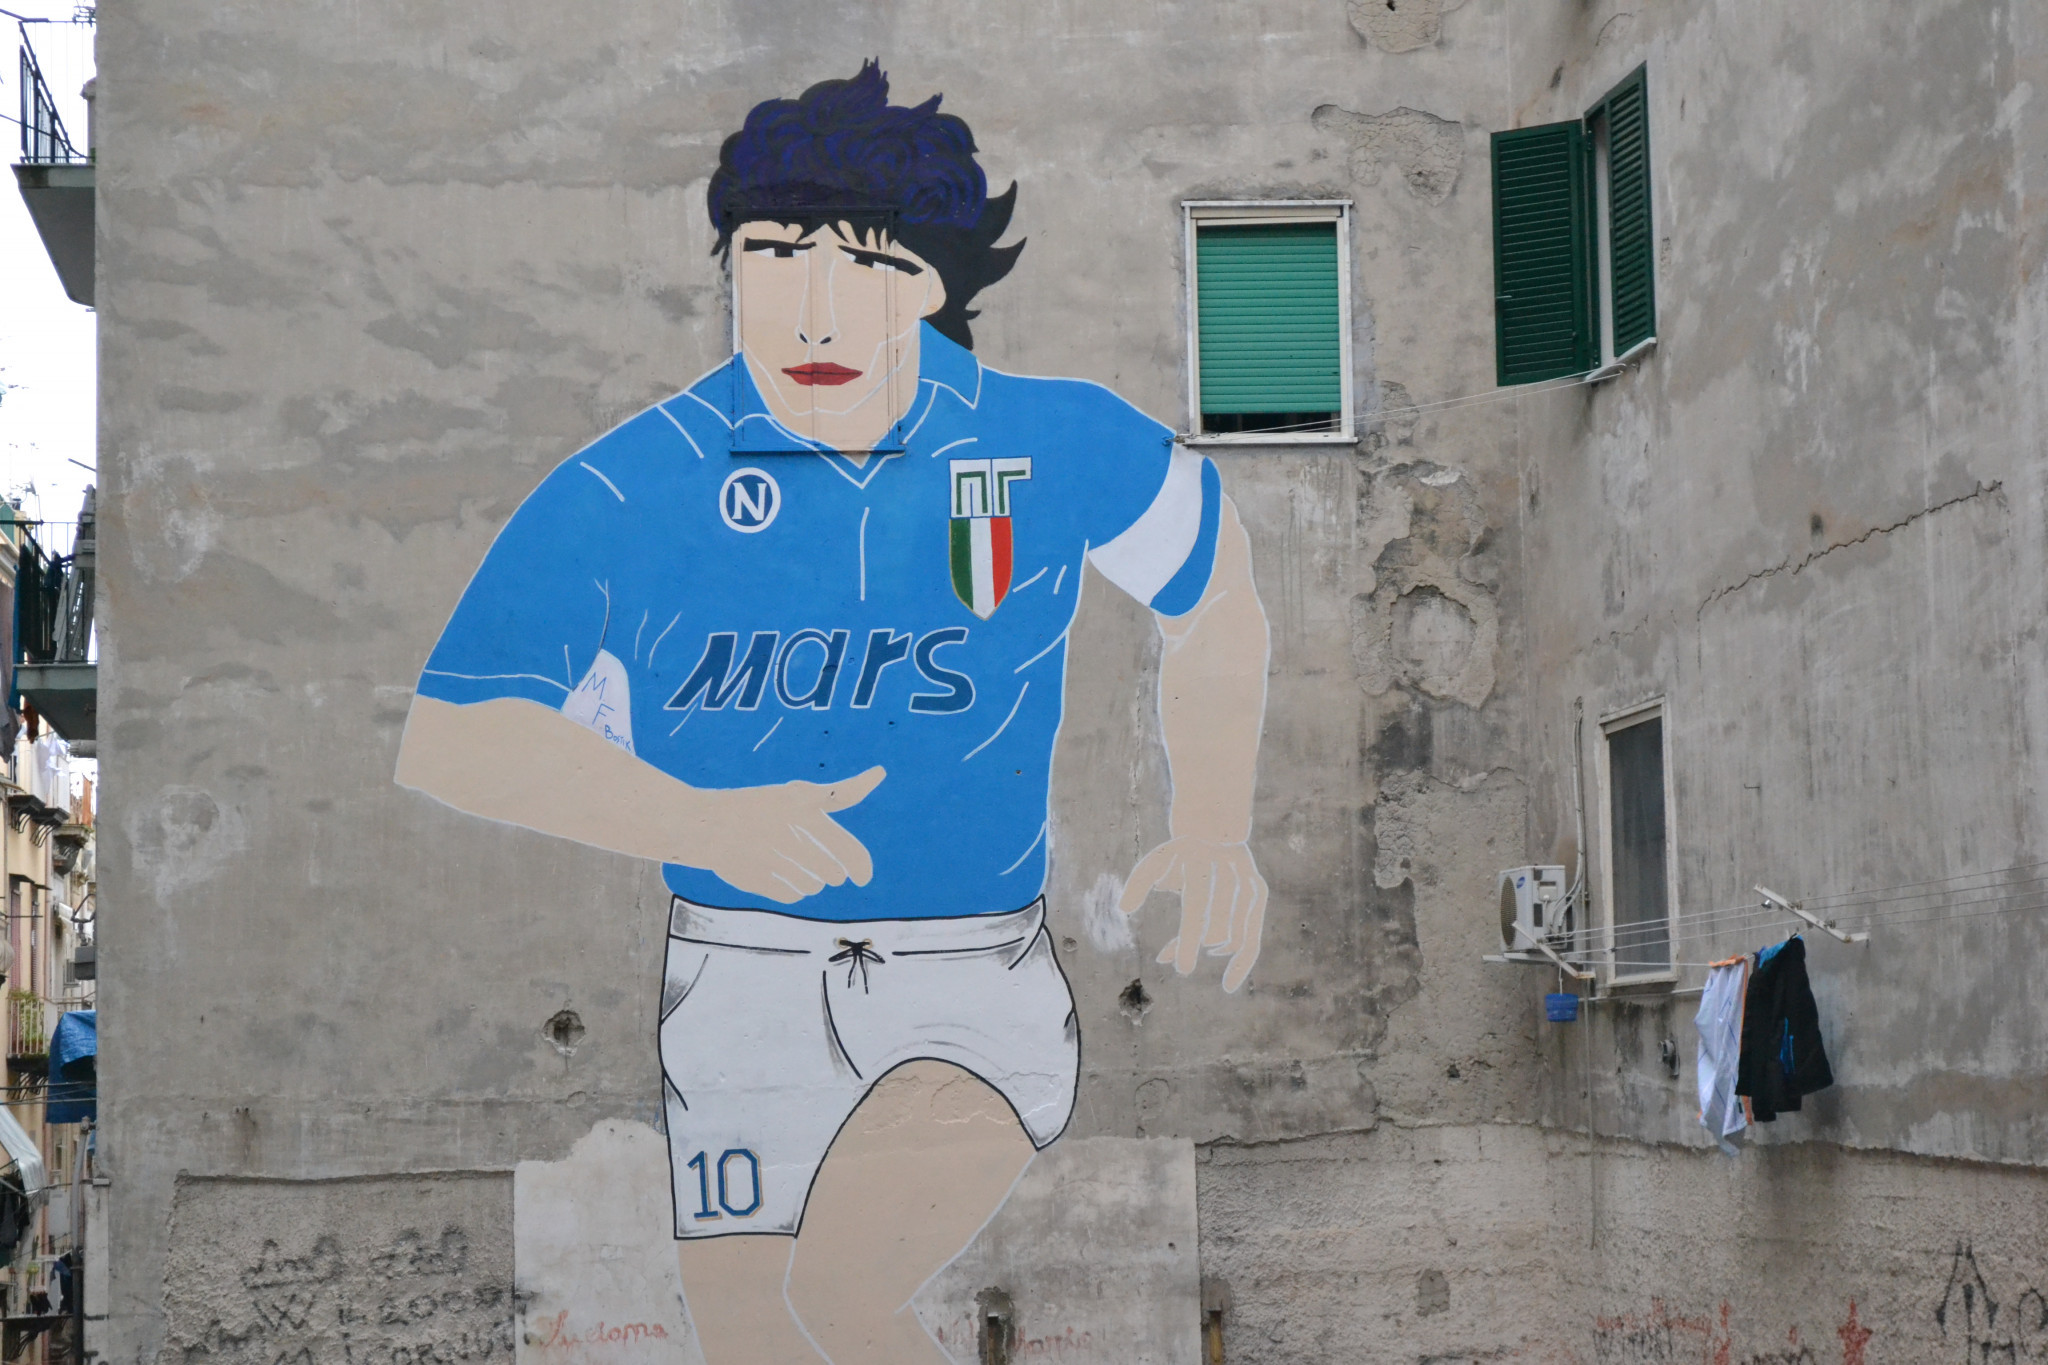 Diego Naples remains a revered figure in Naples, with his image still appearing all over the city ©Philip Barker